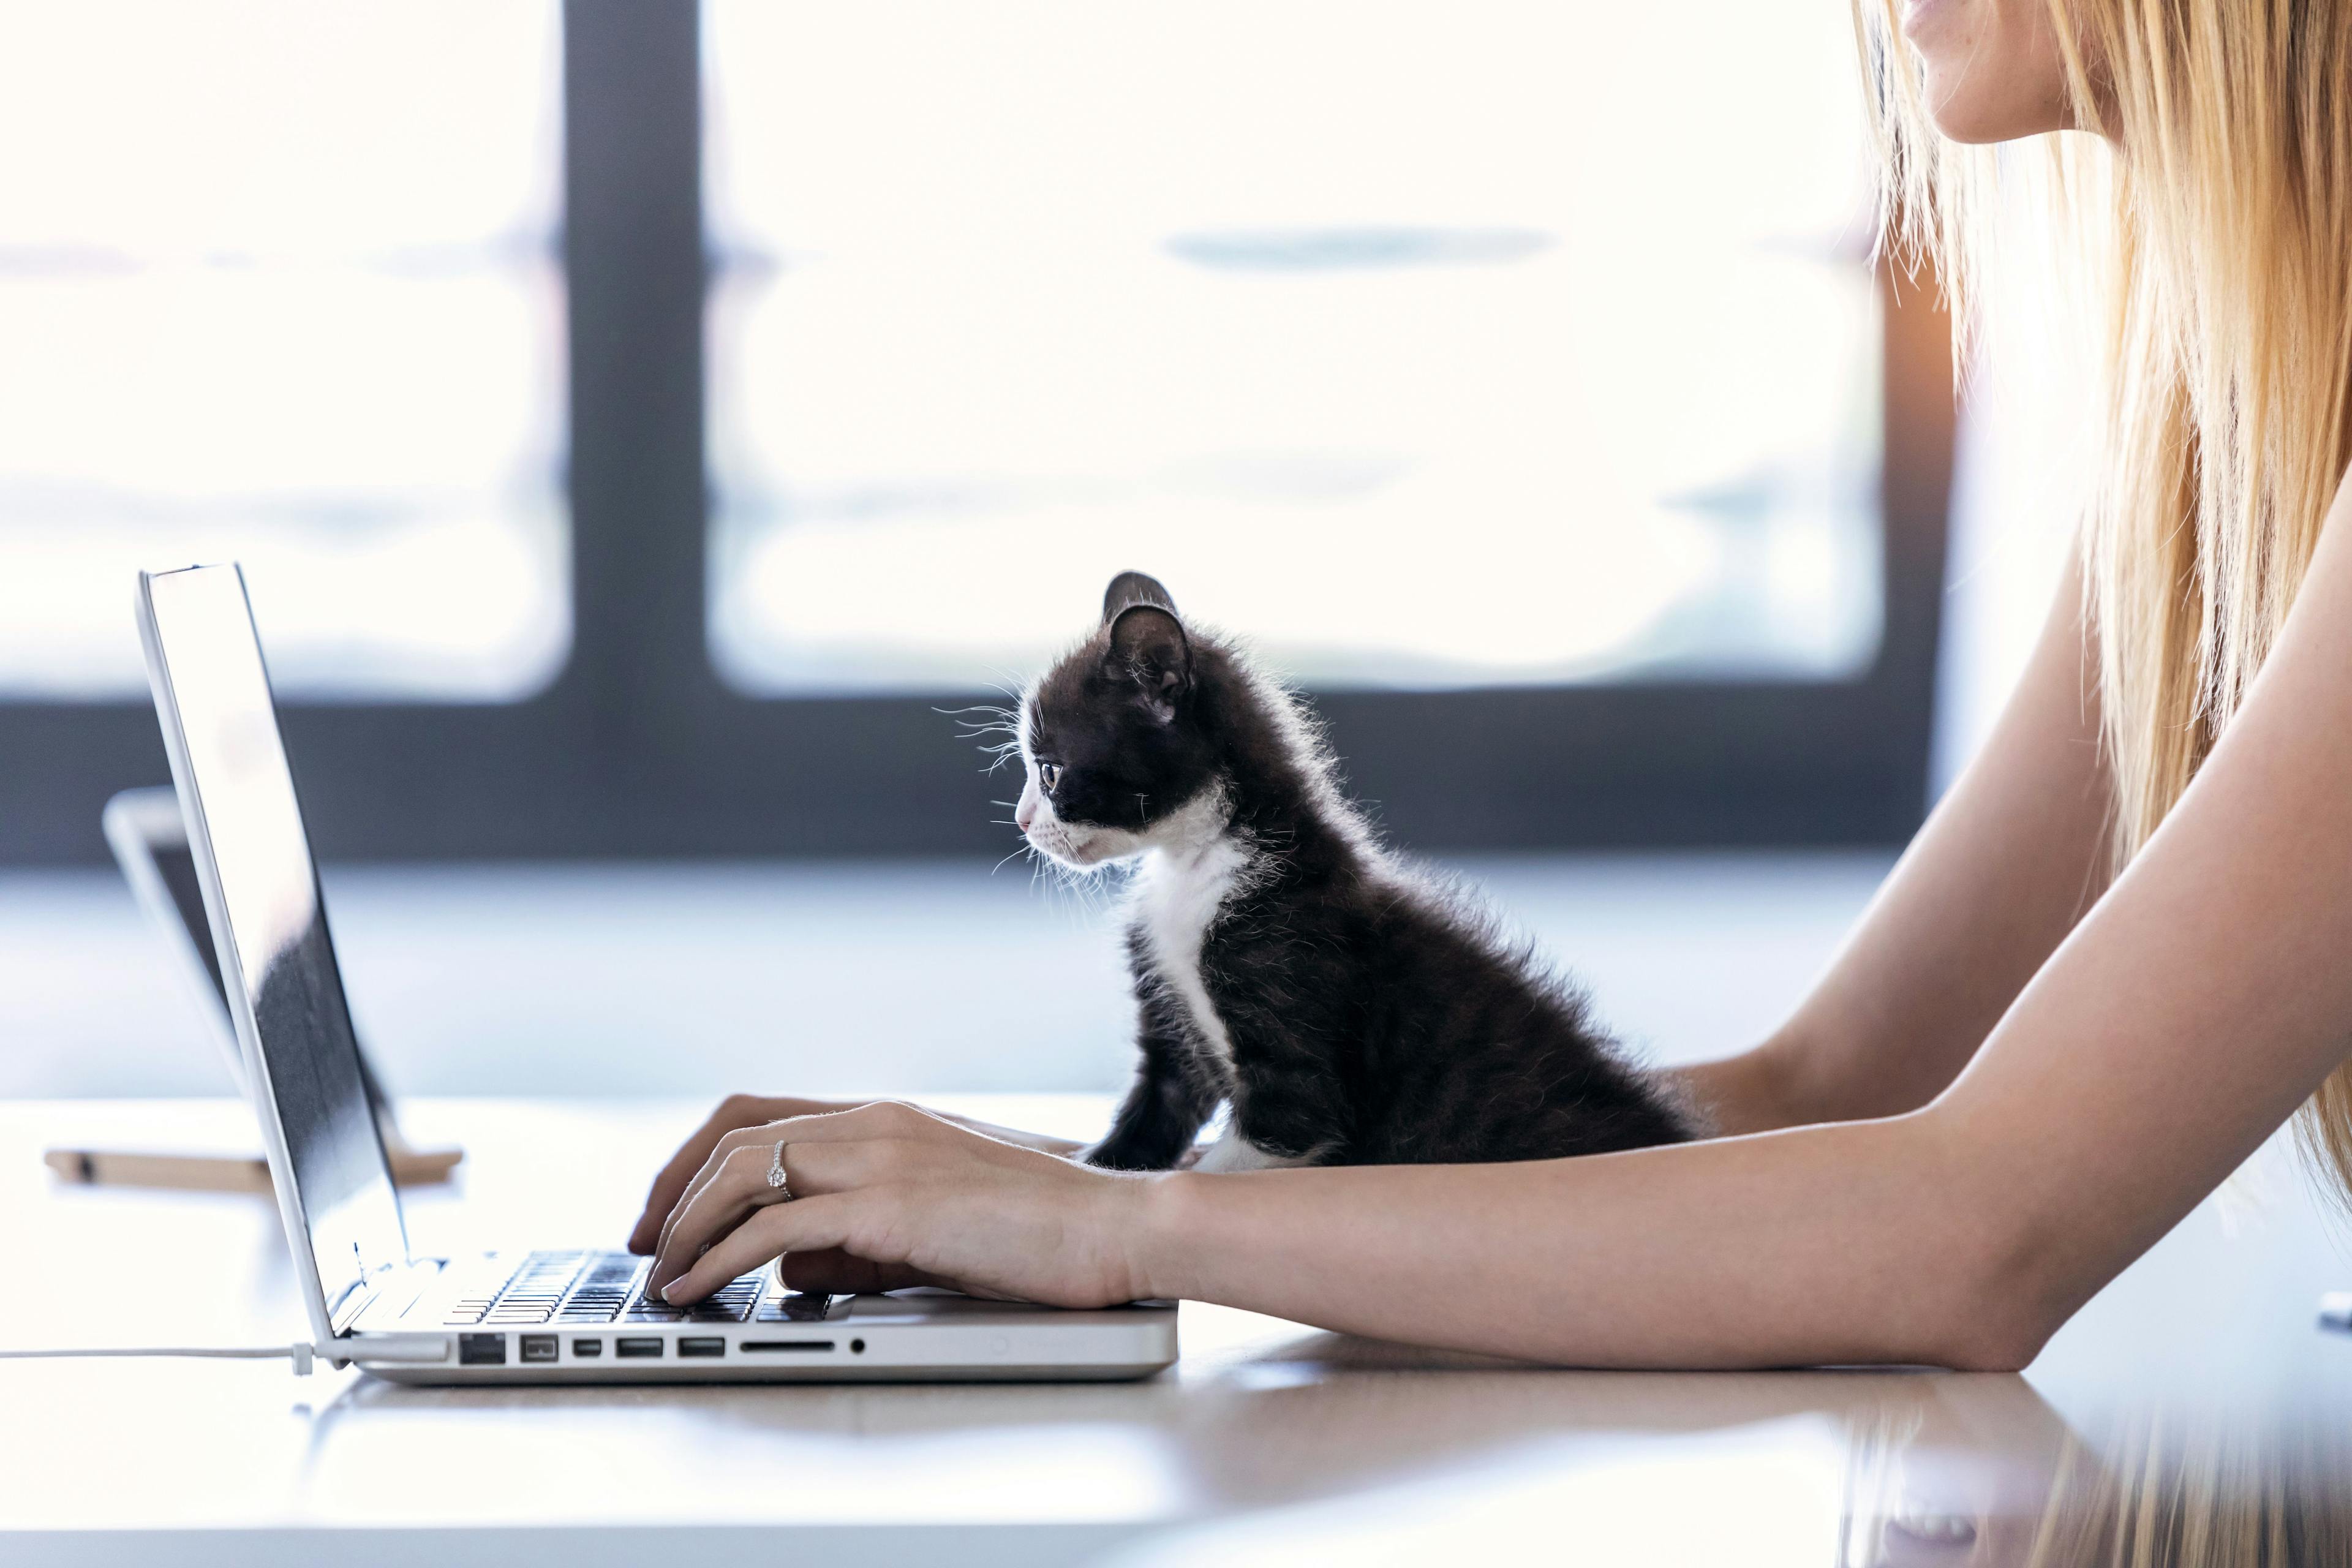 cat looks at laptop screen as owner types